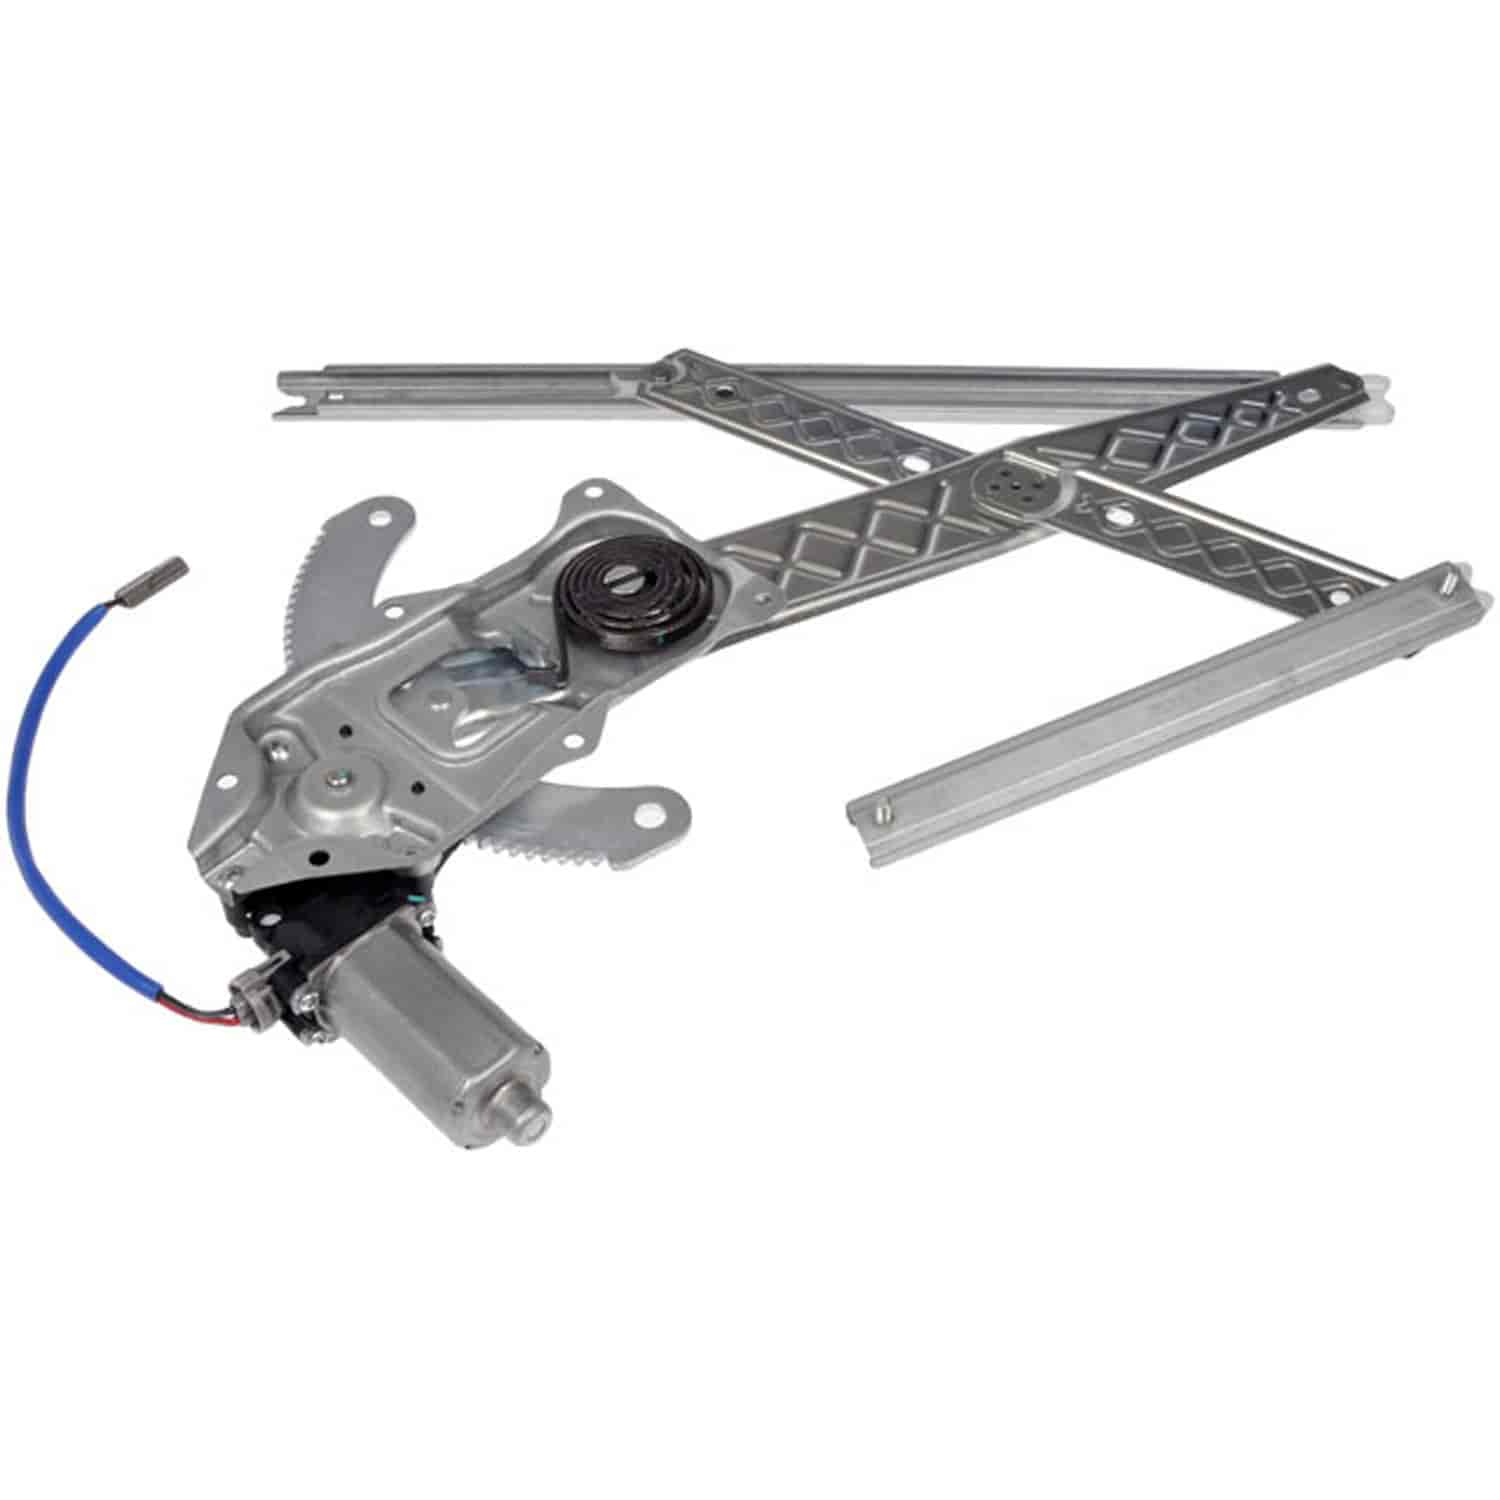 Power Window Regulator & Motor Assembly 1999-2003 Ford F-150, 2004 Ford F-150 Heritage, 1999 Ford F-250